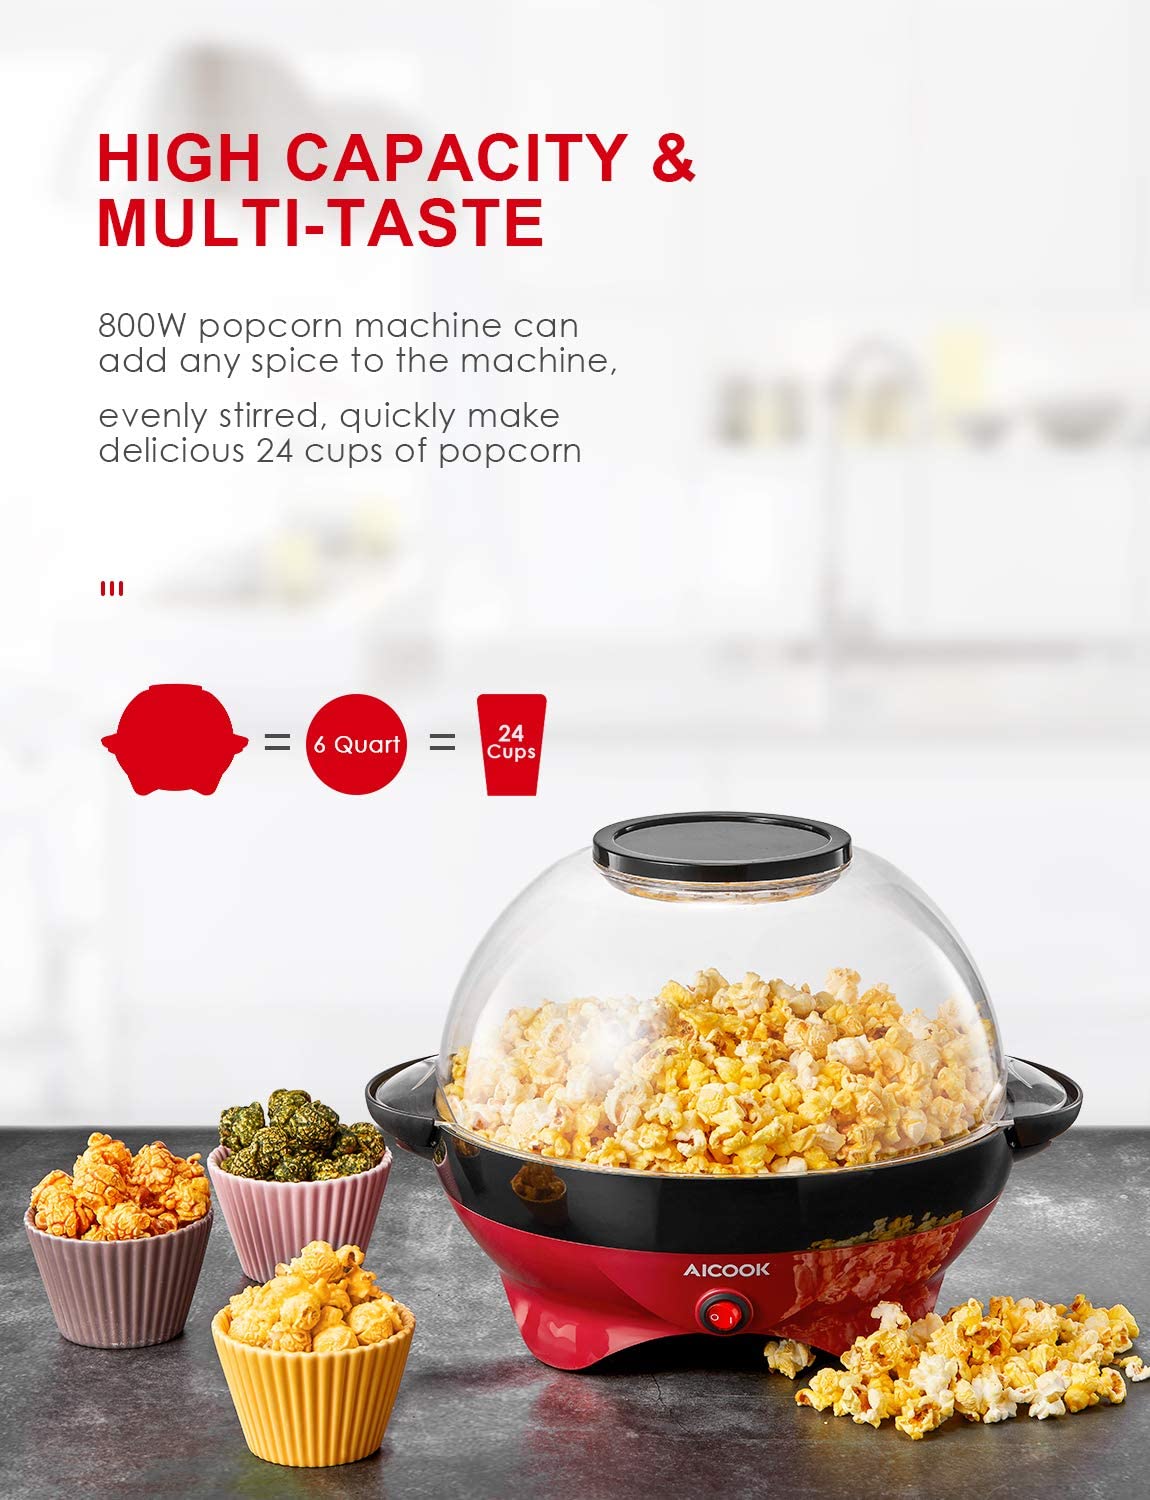 Popcorn Machine, AICOOK 6-Quart/24-Cup 800W Fast Heat-up Popcorn Popper Machine, Electric Hot Oil Butter Popcorn Maker with Stirring Rod, Nonstick Plate, High Capacity and Multi-Taste, Dishwasher Safe, Red